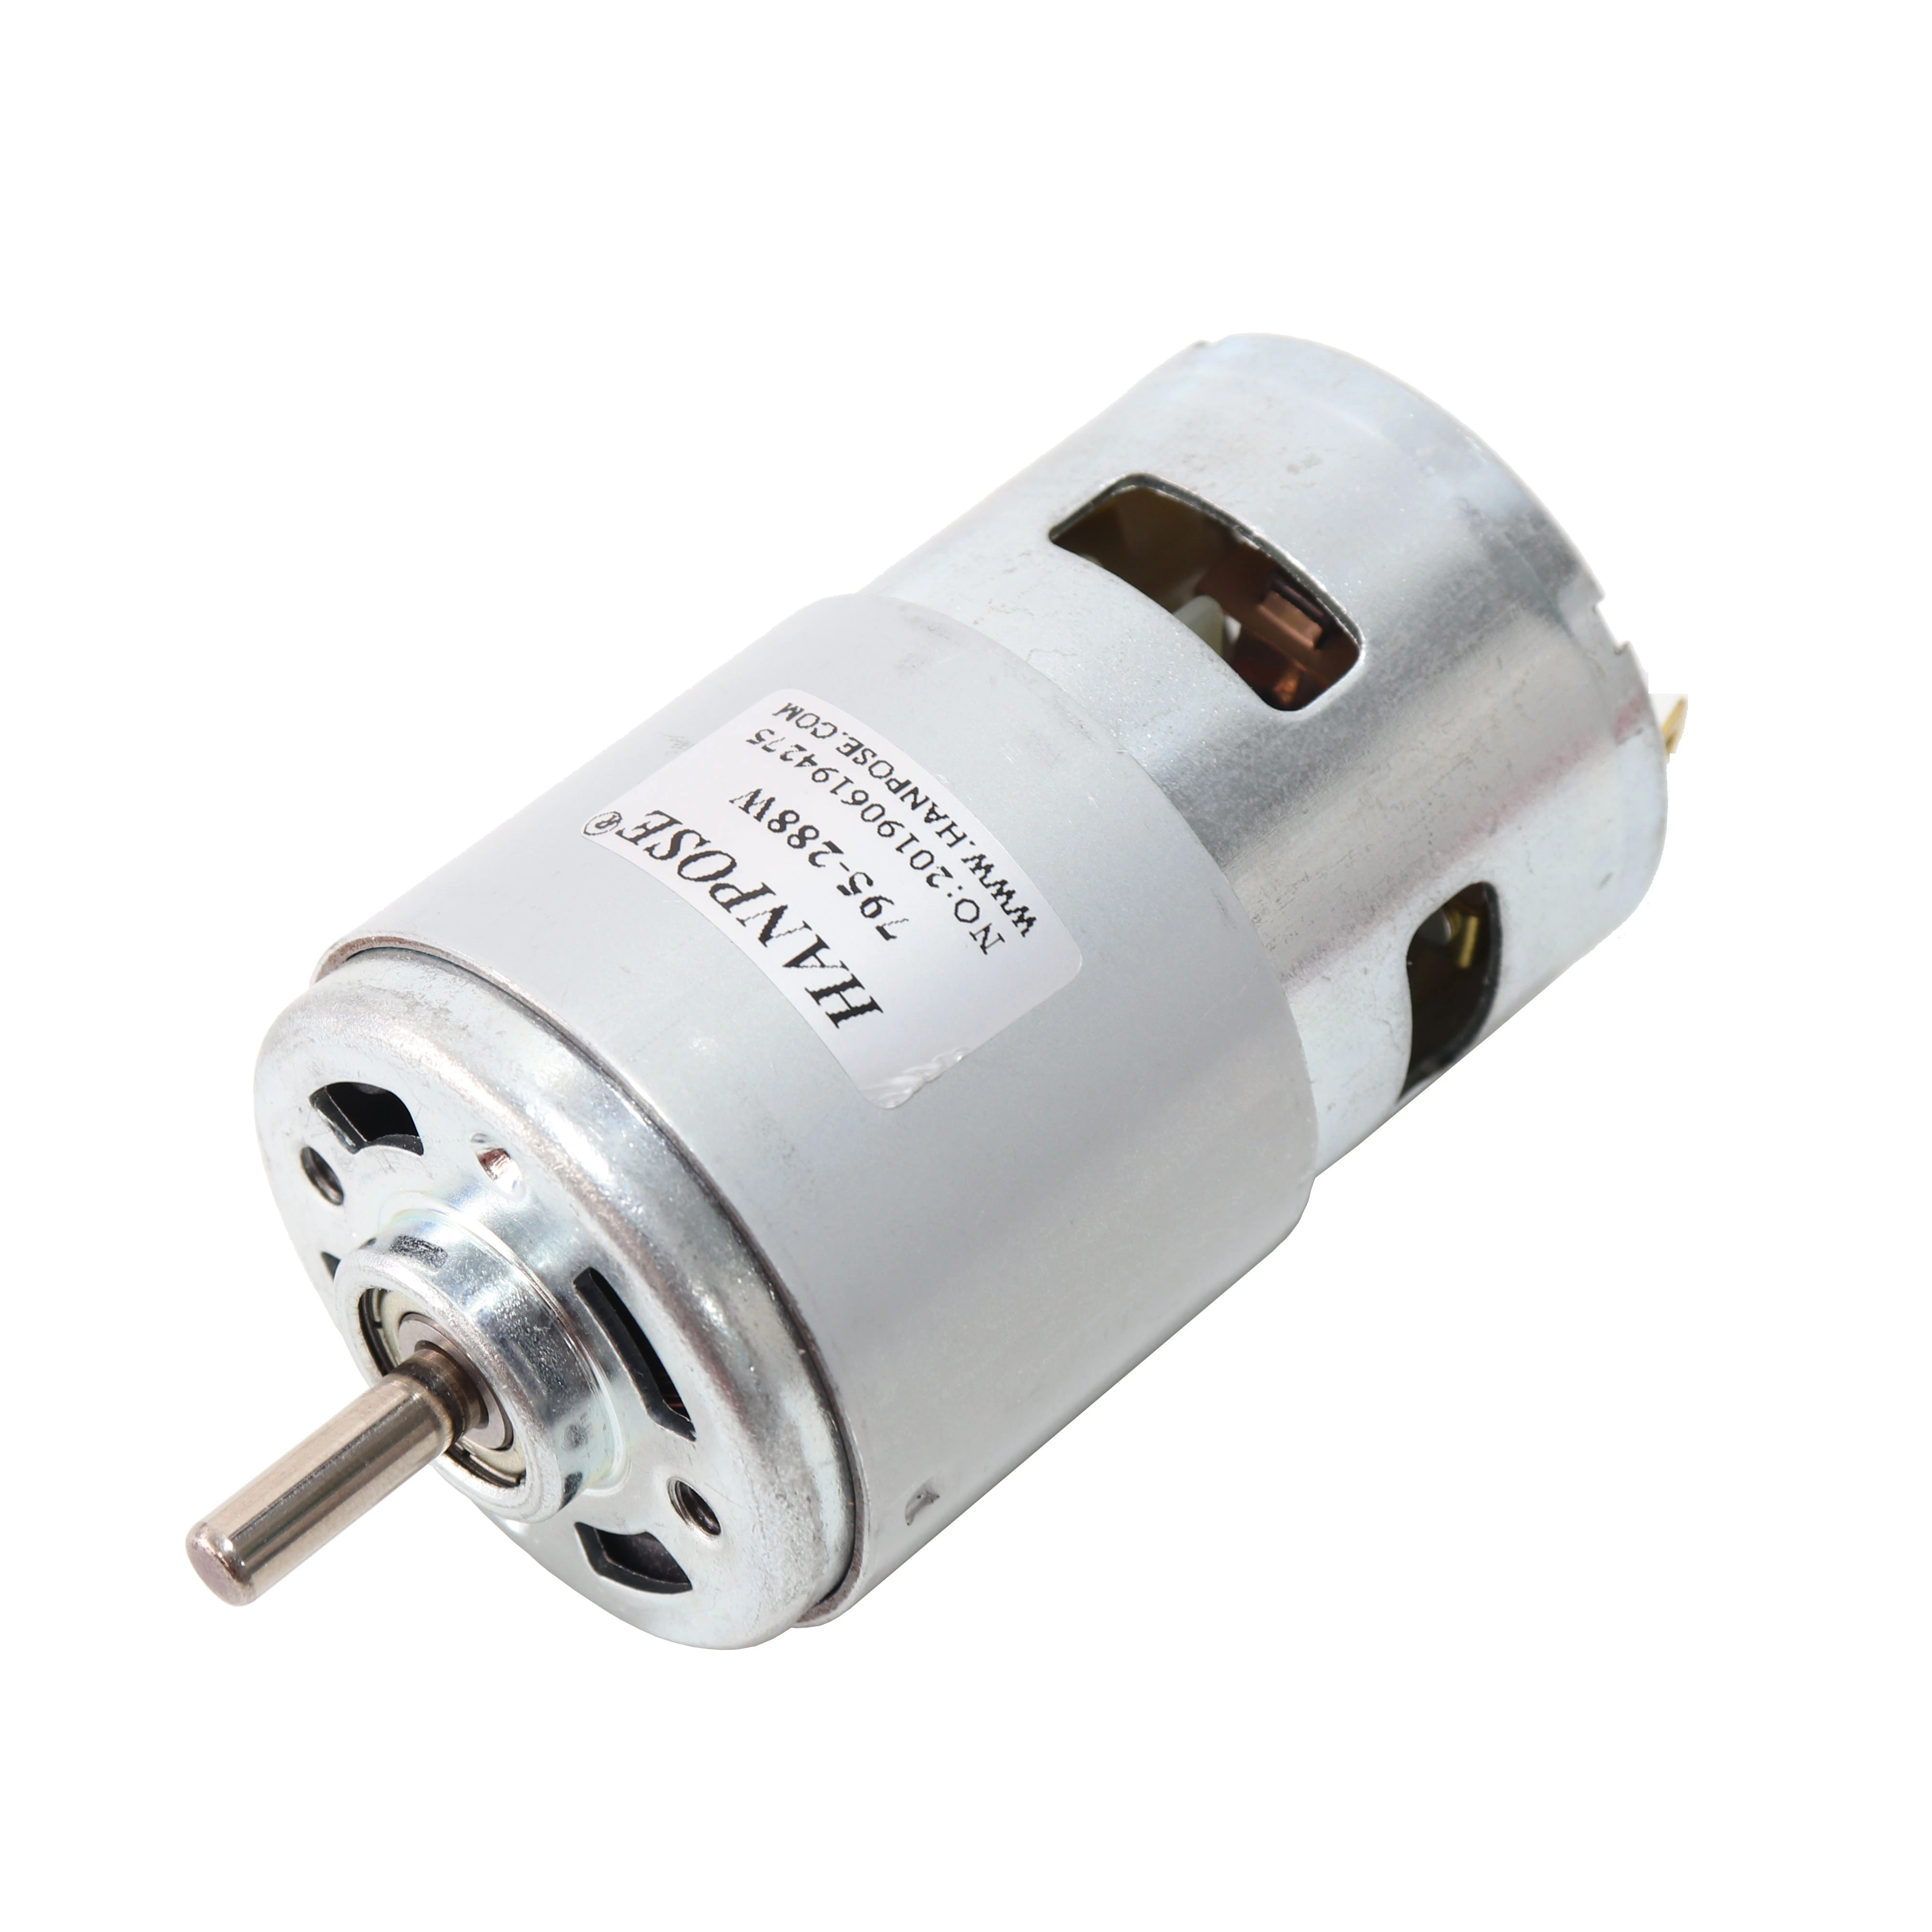 795 dc Motor  12000rmp 12V  Ball Bearing Large Torque High Power Low Noise Hot Sale Electronic Component Motor